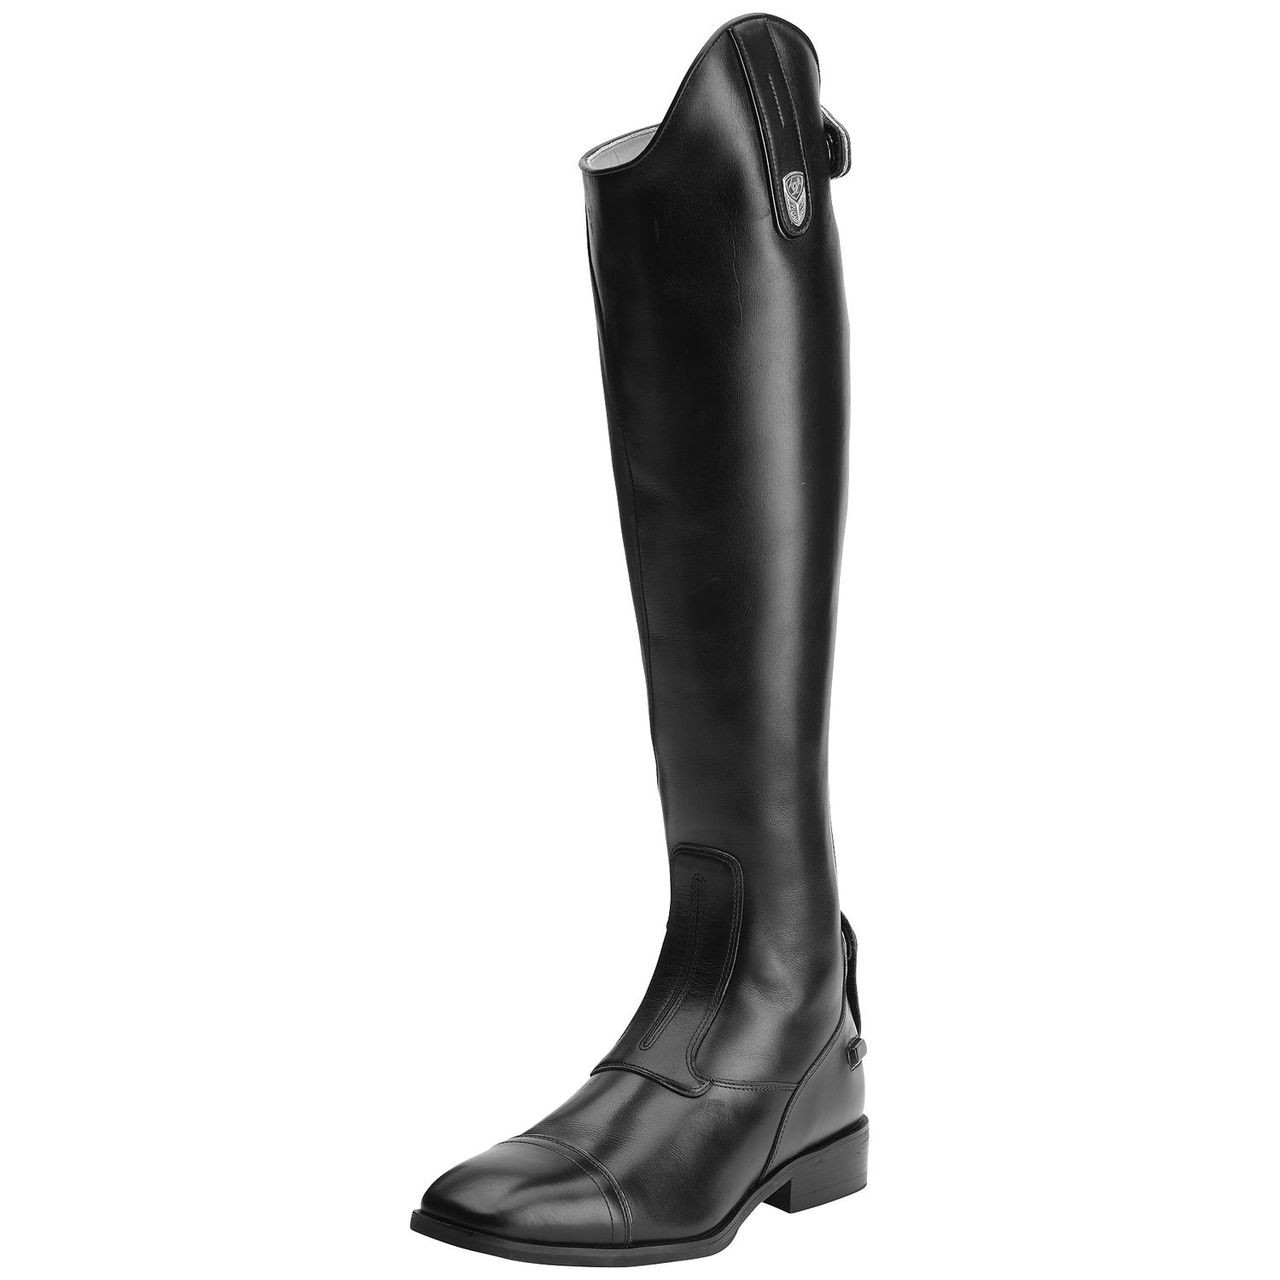 moschino boots mens